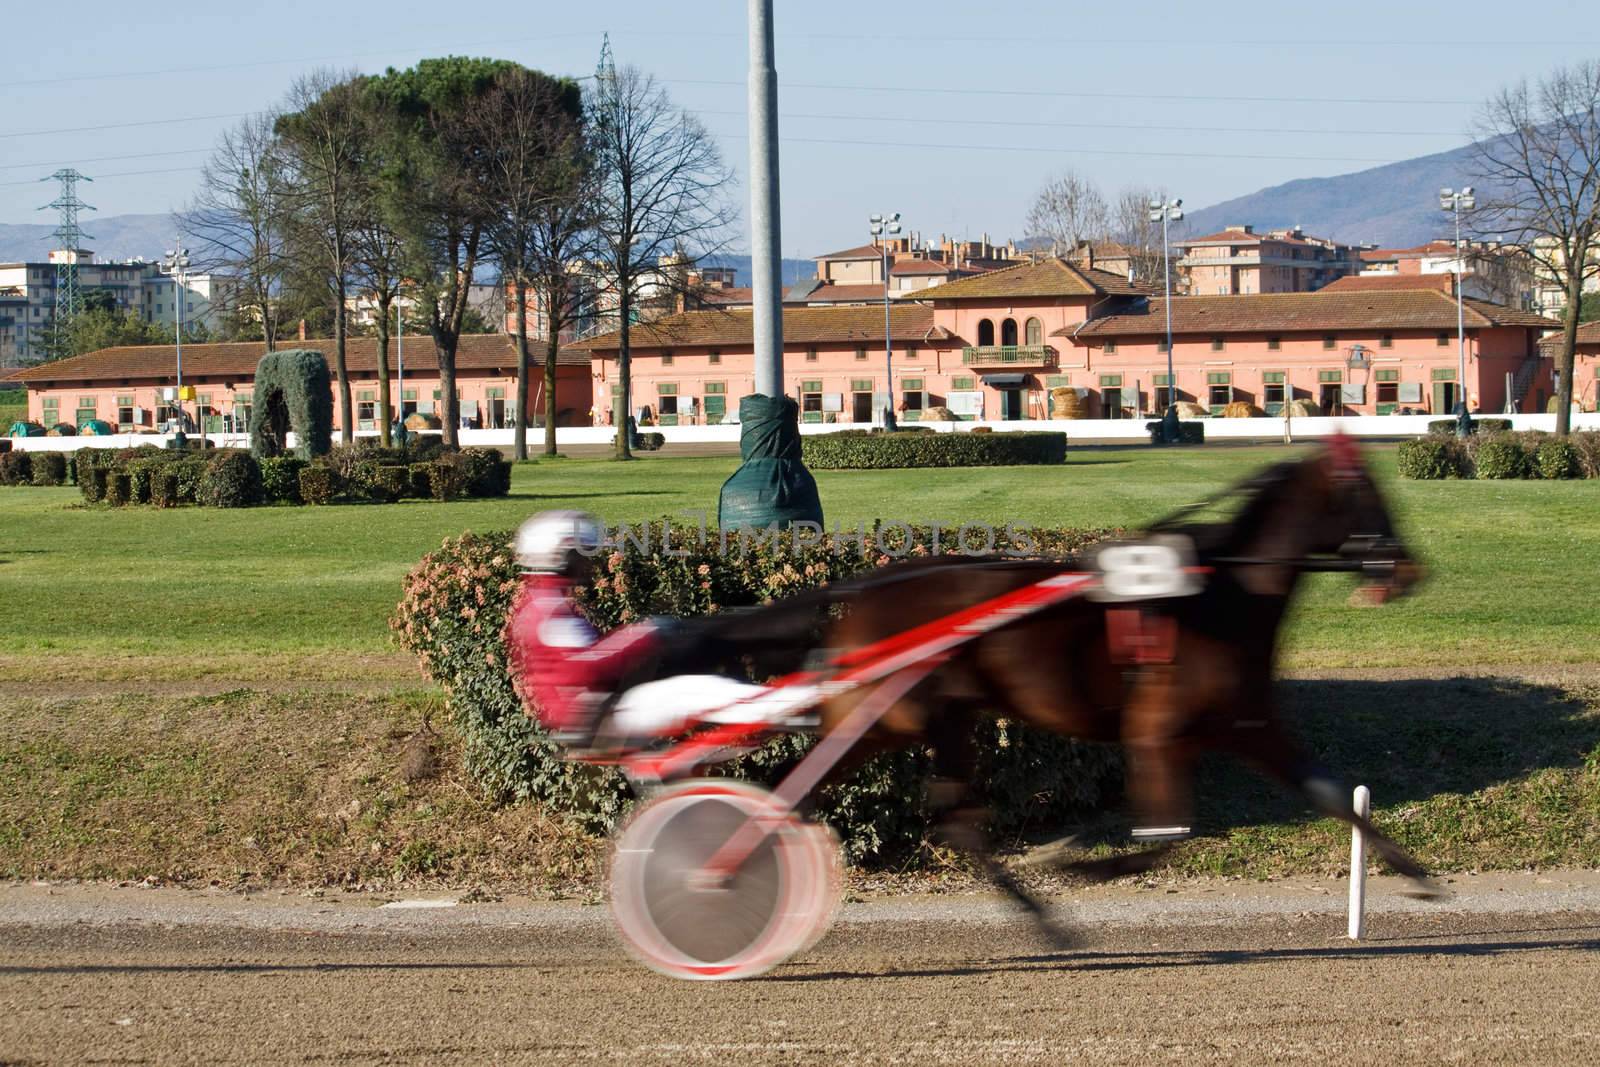 An image of horse trotting cart race competition